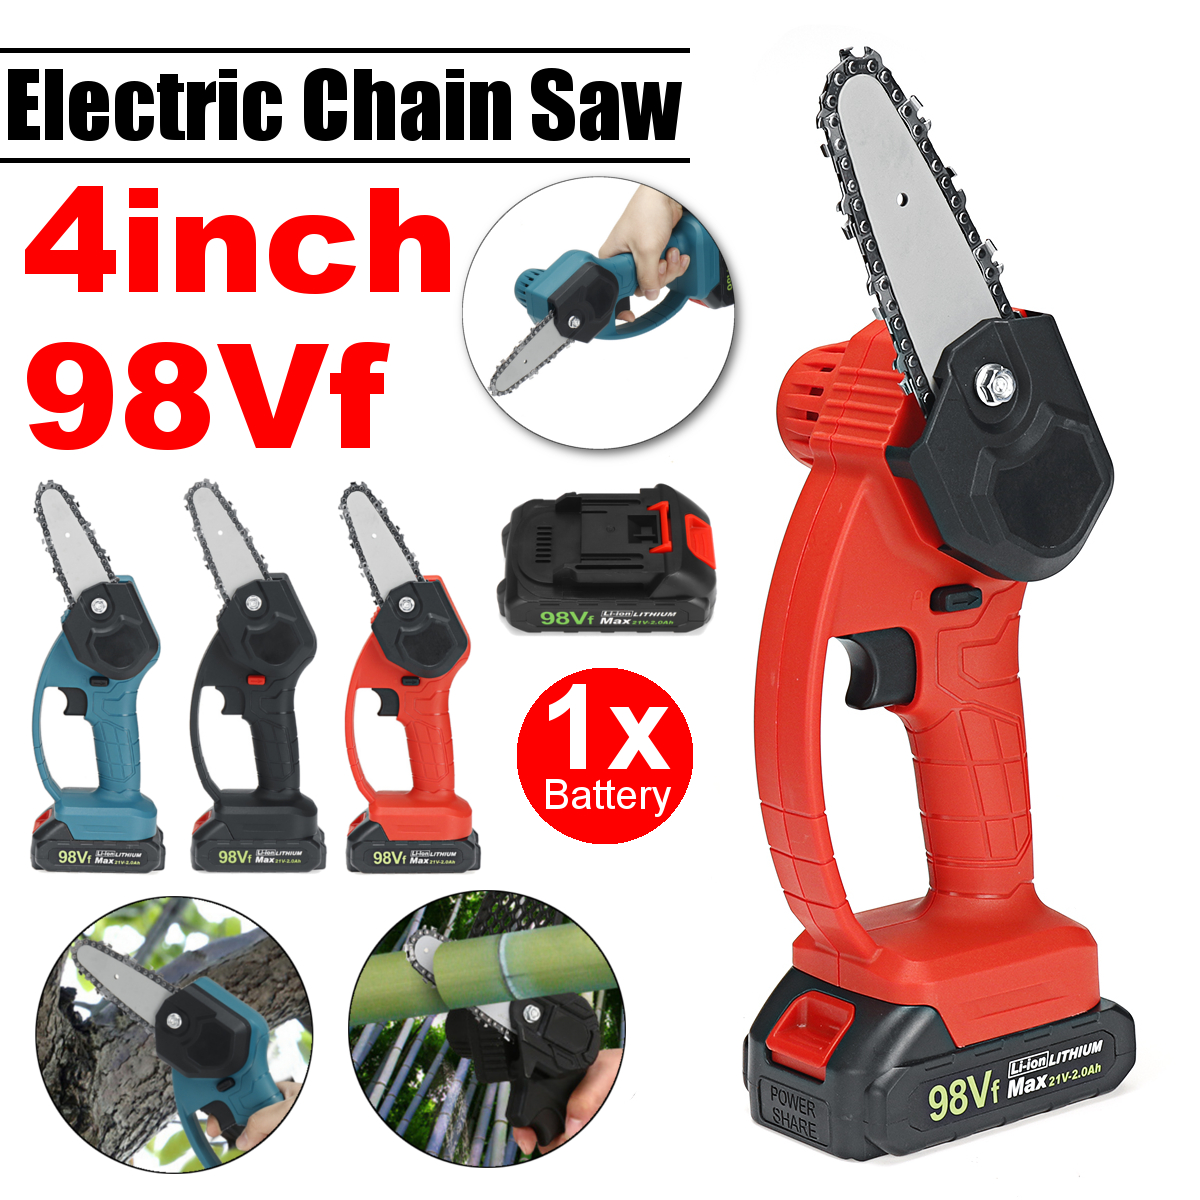 550W-98VF-4inch-Rechargeable-Electric-Chain-Saw-Woodworking-Cutting-Saw-W-1pc-Battery-1792714-2